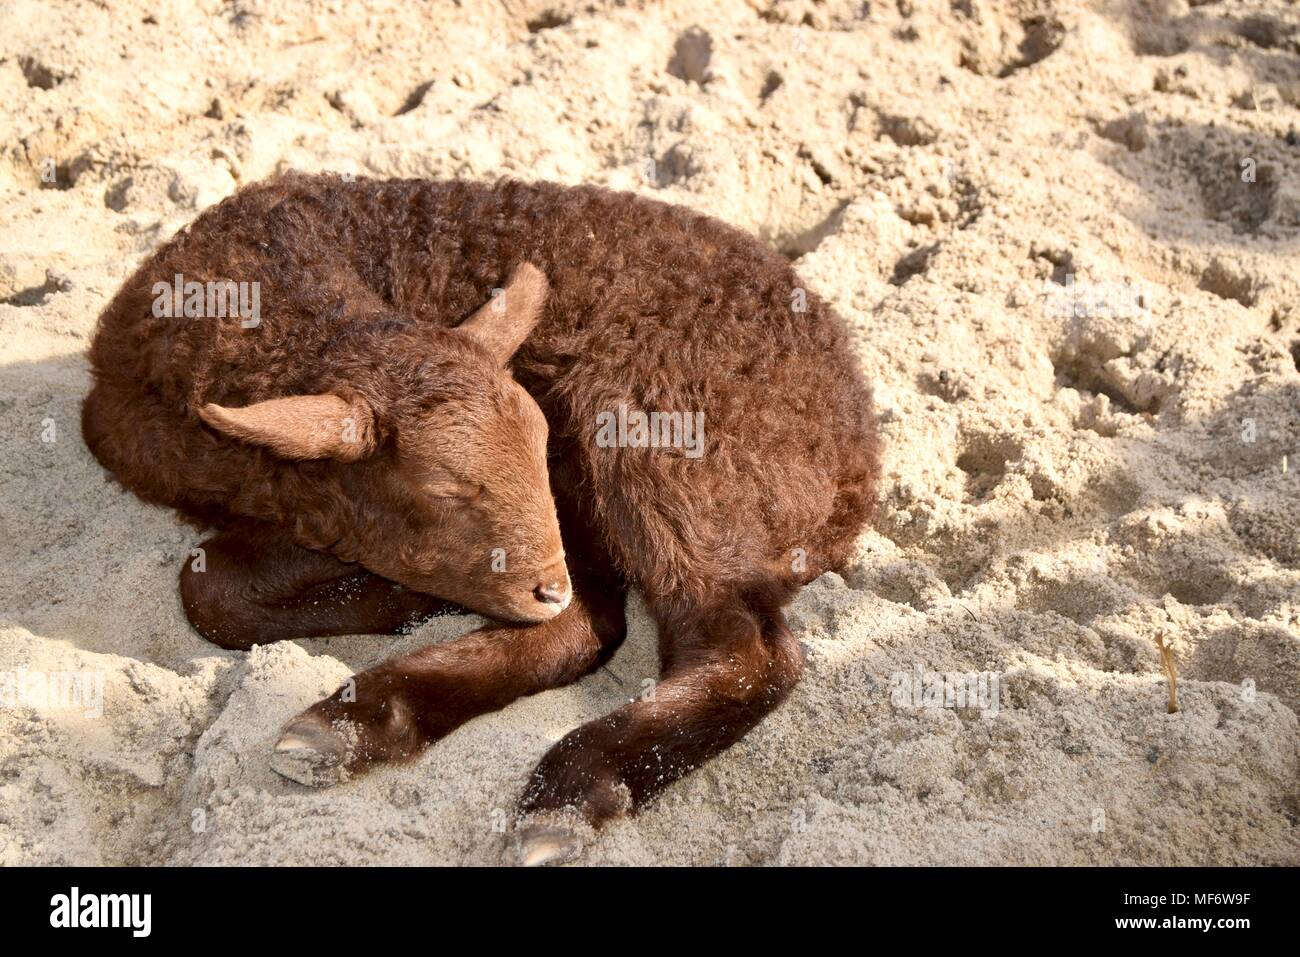 A little brown new born lamb sleeping curled up in the sand on the floor. Stock Photo